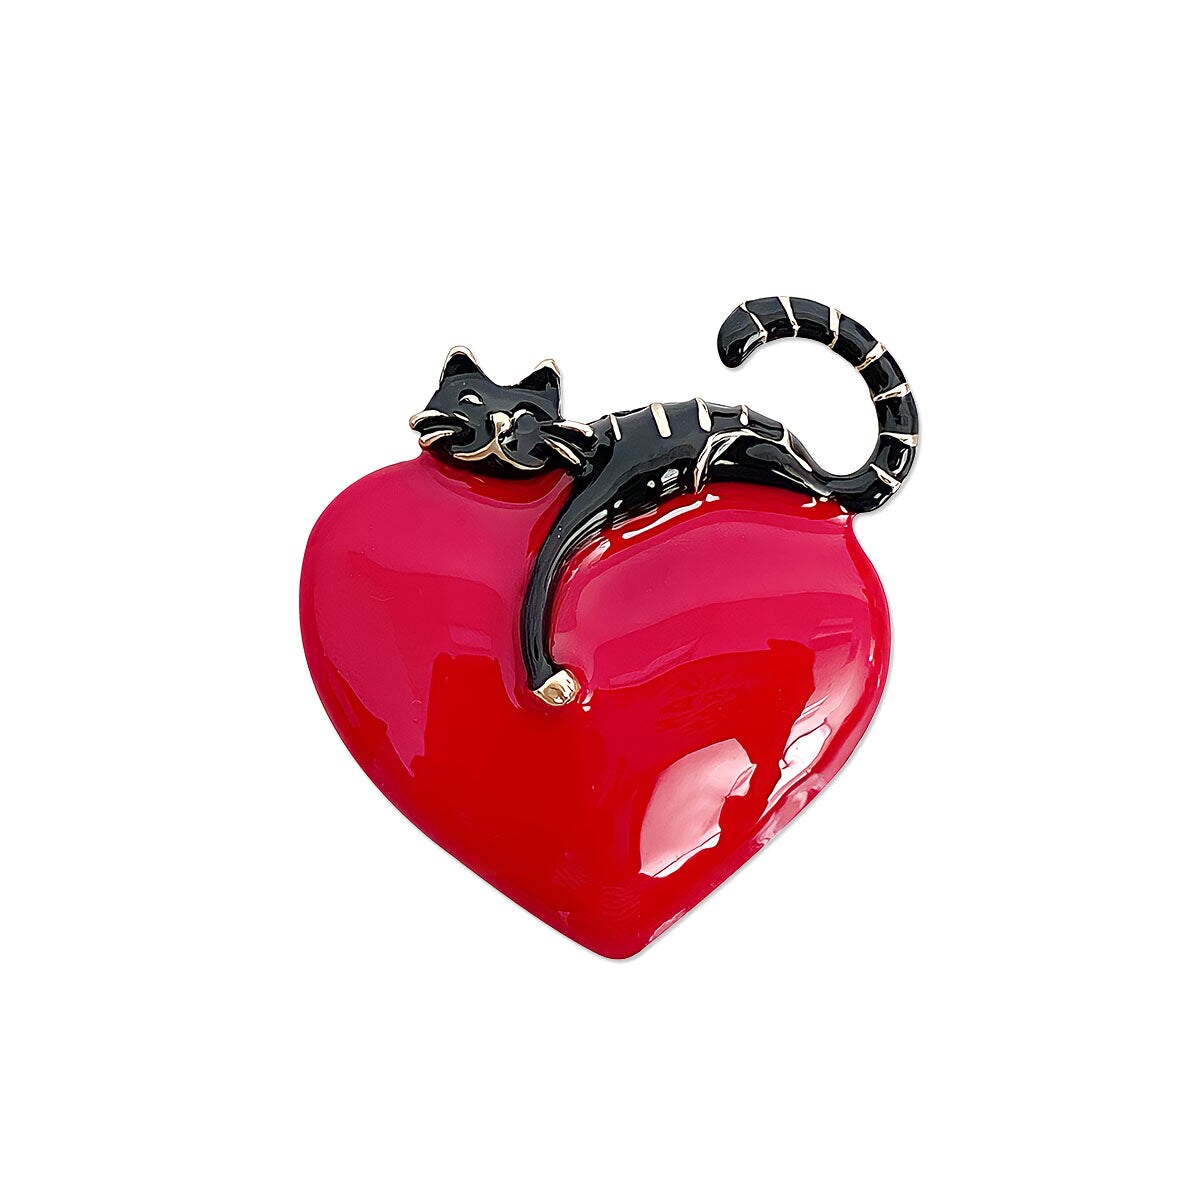 Wrapables Lounging Cats Enamel Brooch Pin, Cat on Heart